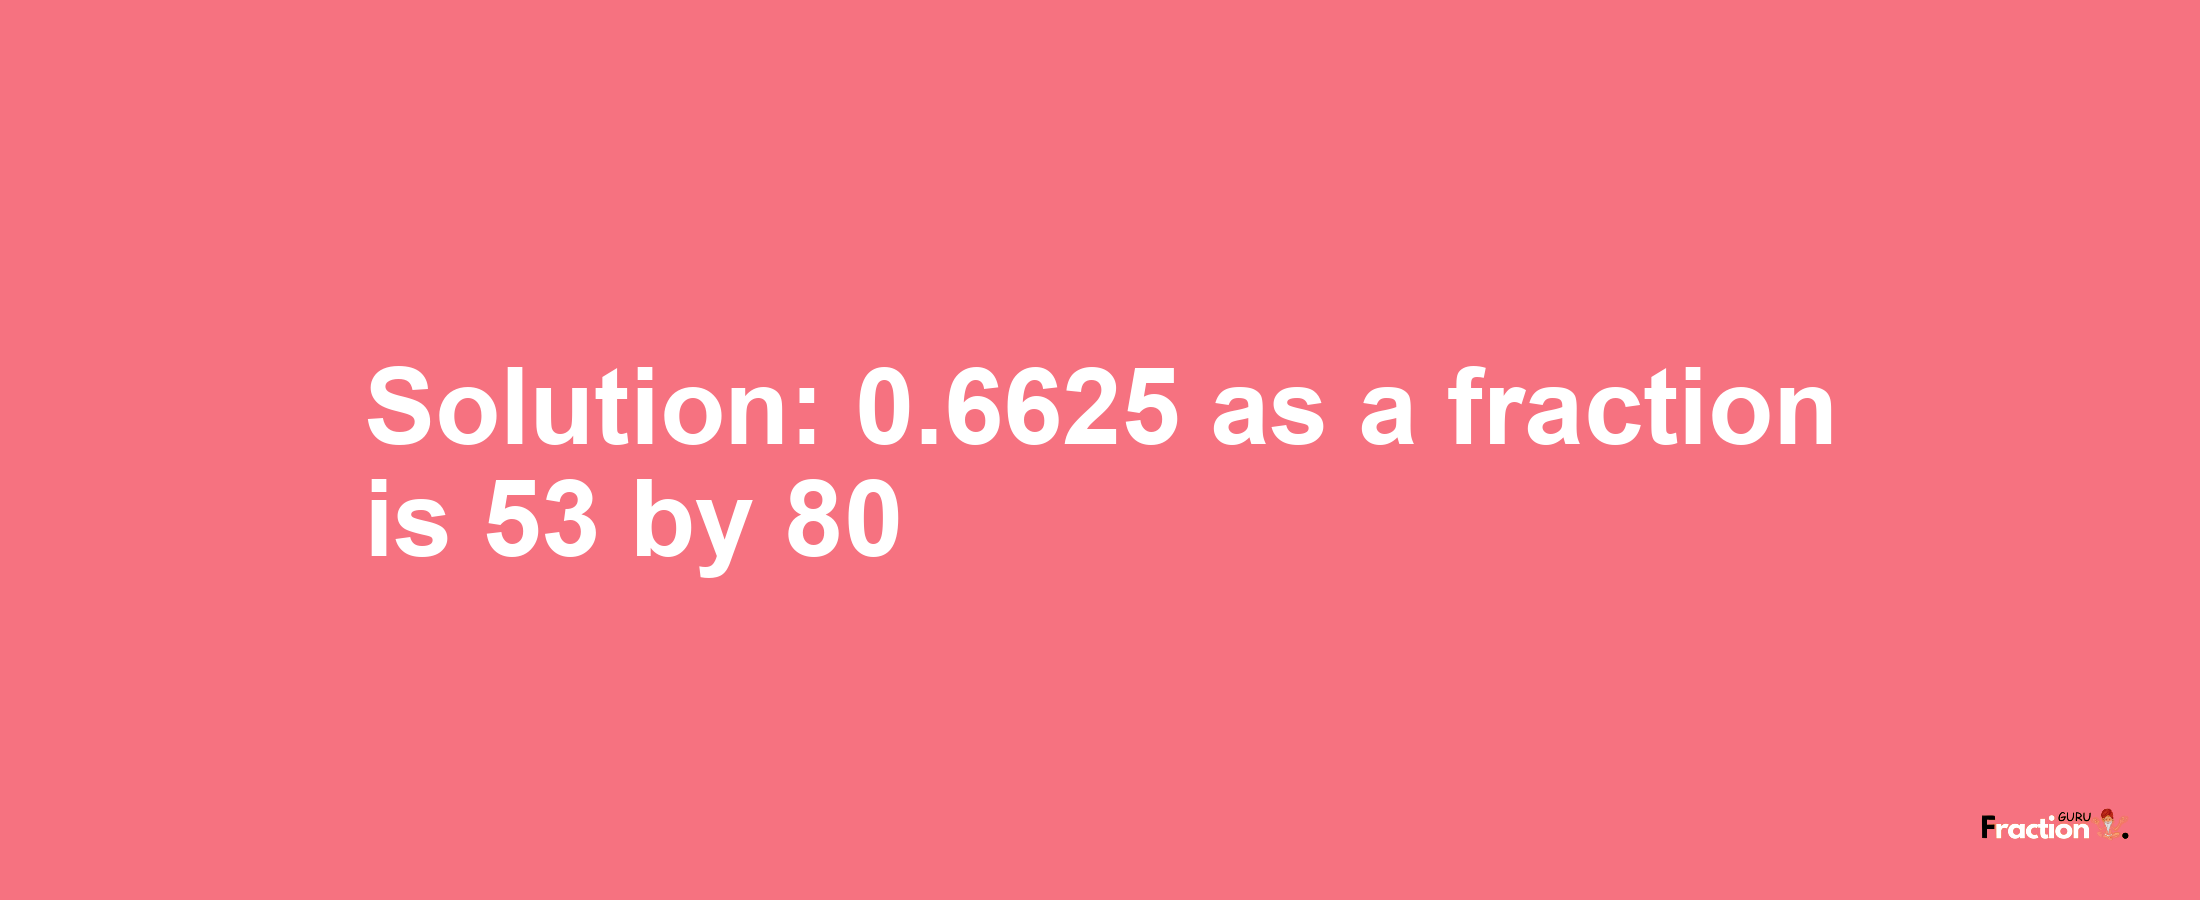 Solution:0.6625 as a fraction is 53/80